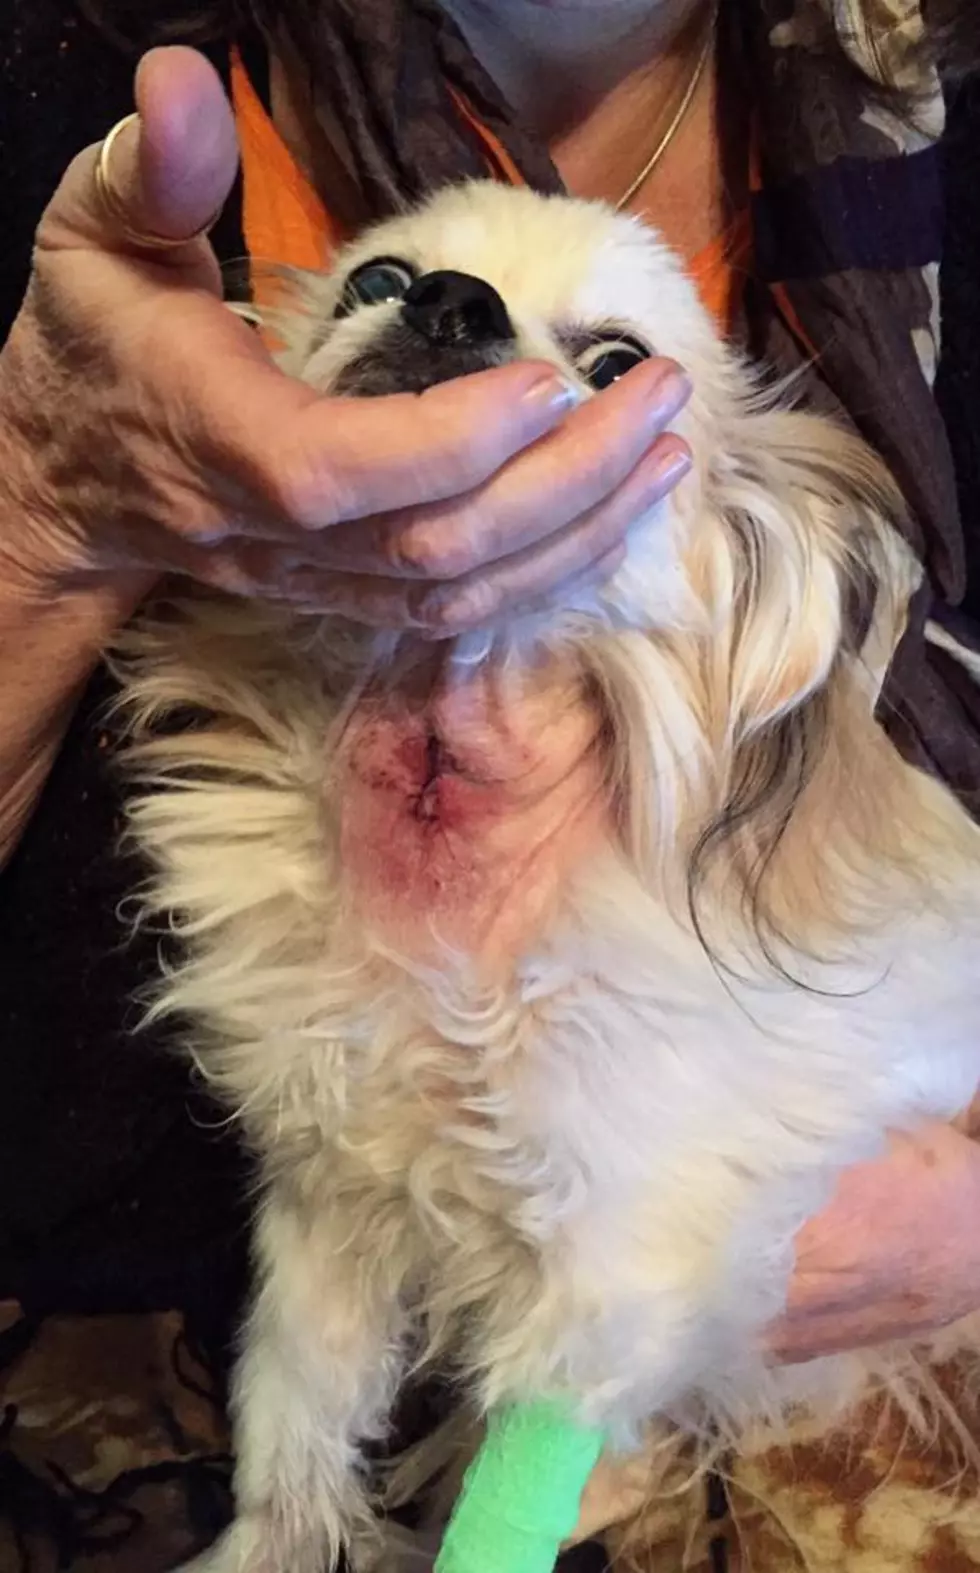 Holiday Table Scraps Almost Killed My Friend&#8217;s Dog